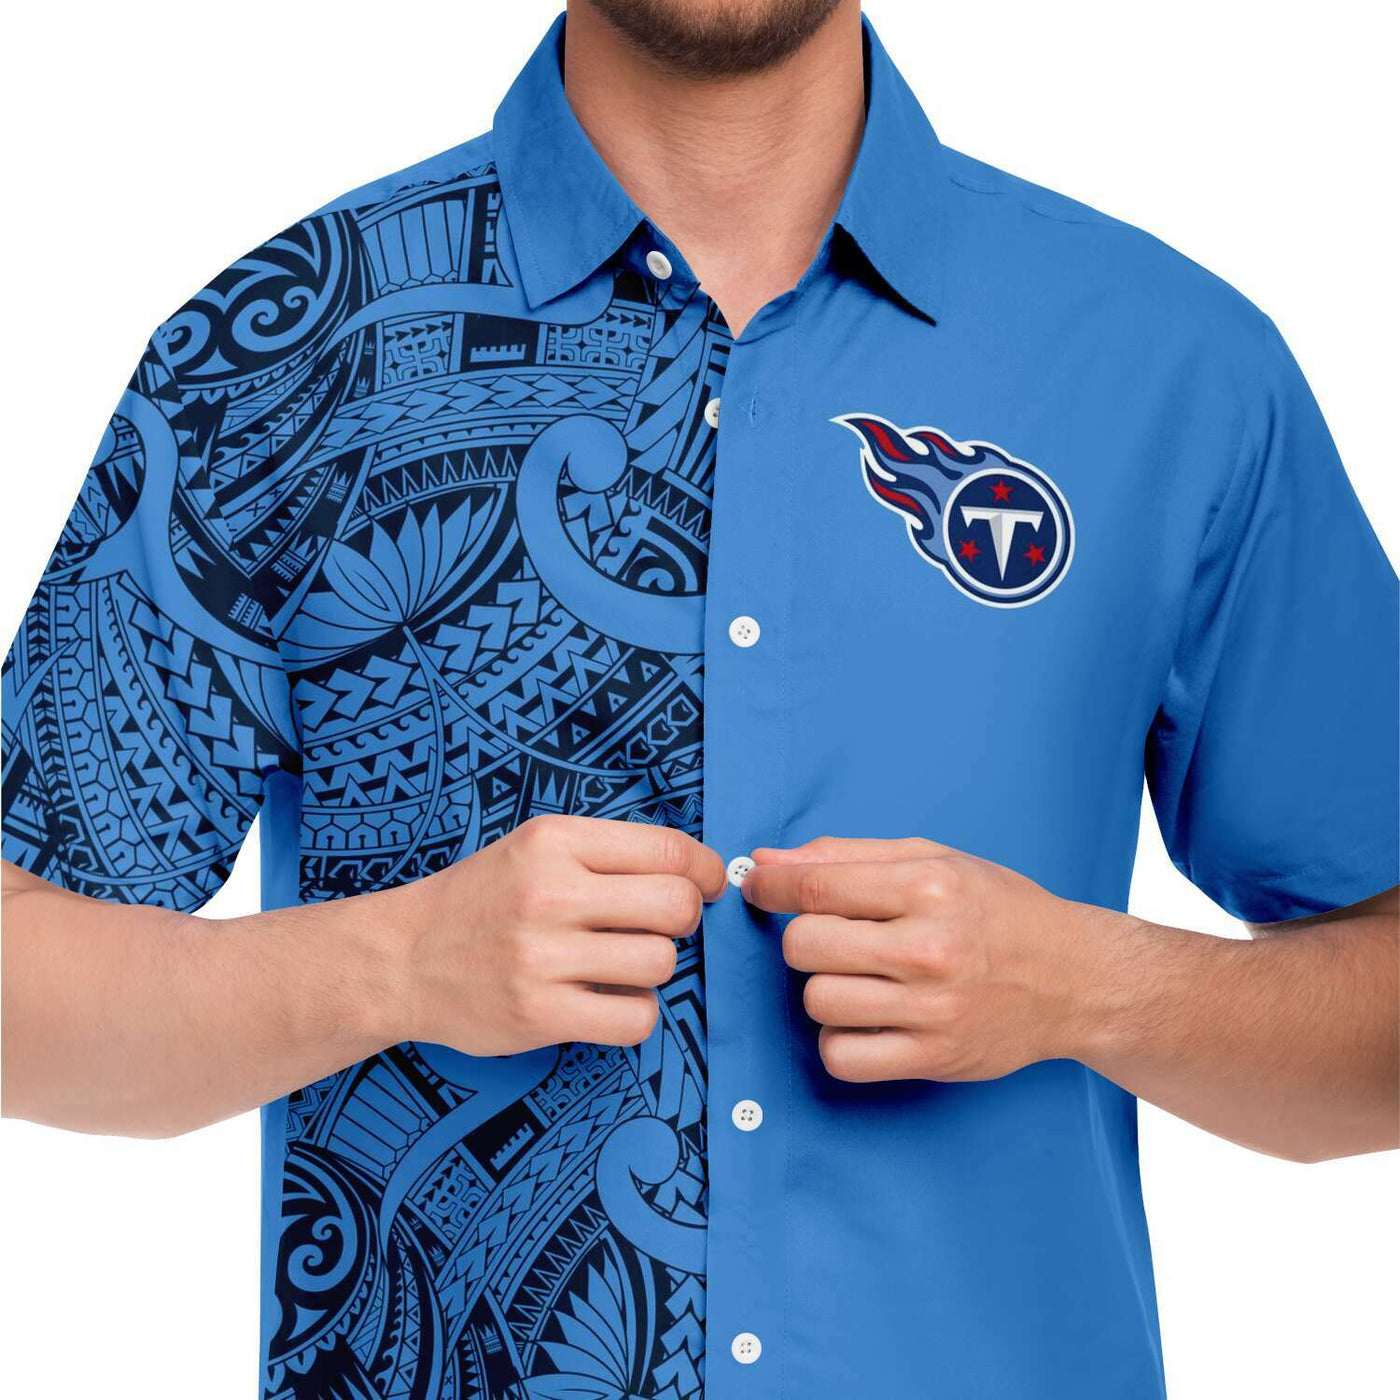 tennessee titans button up shirt